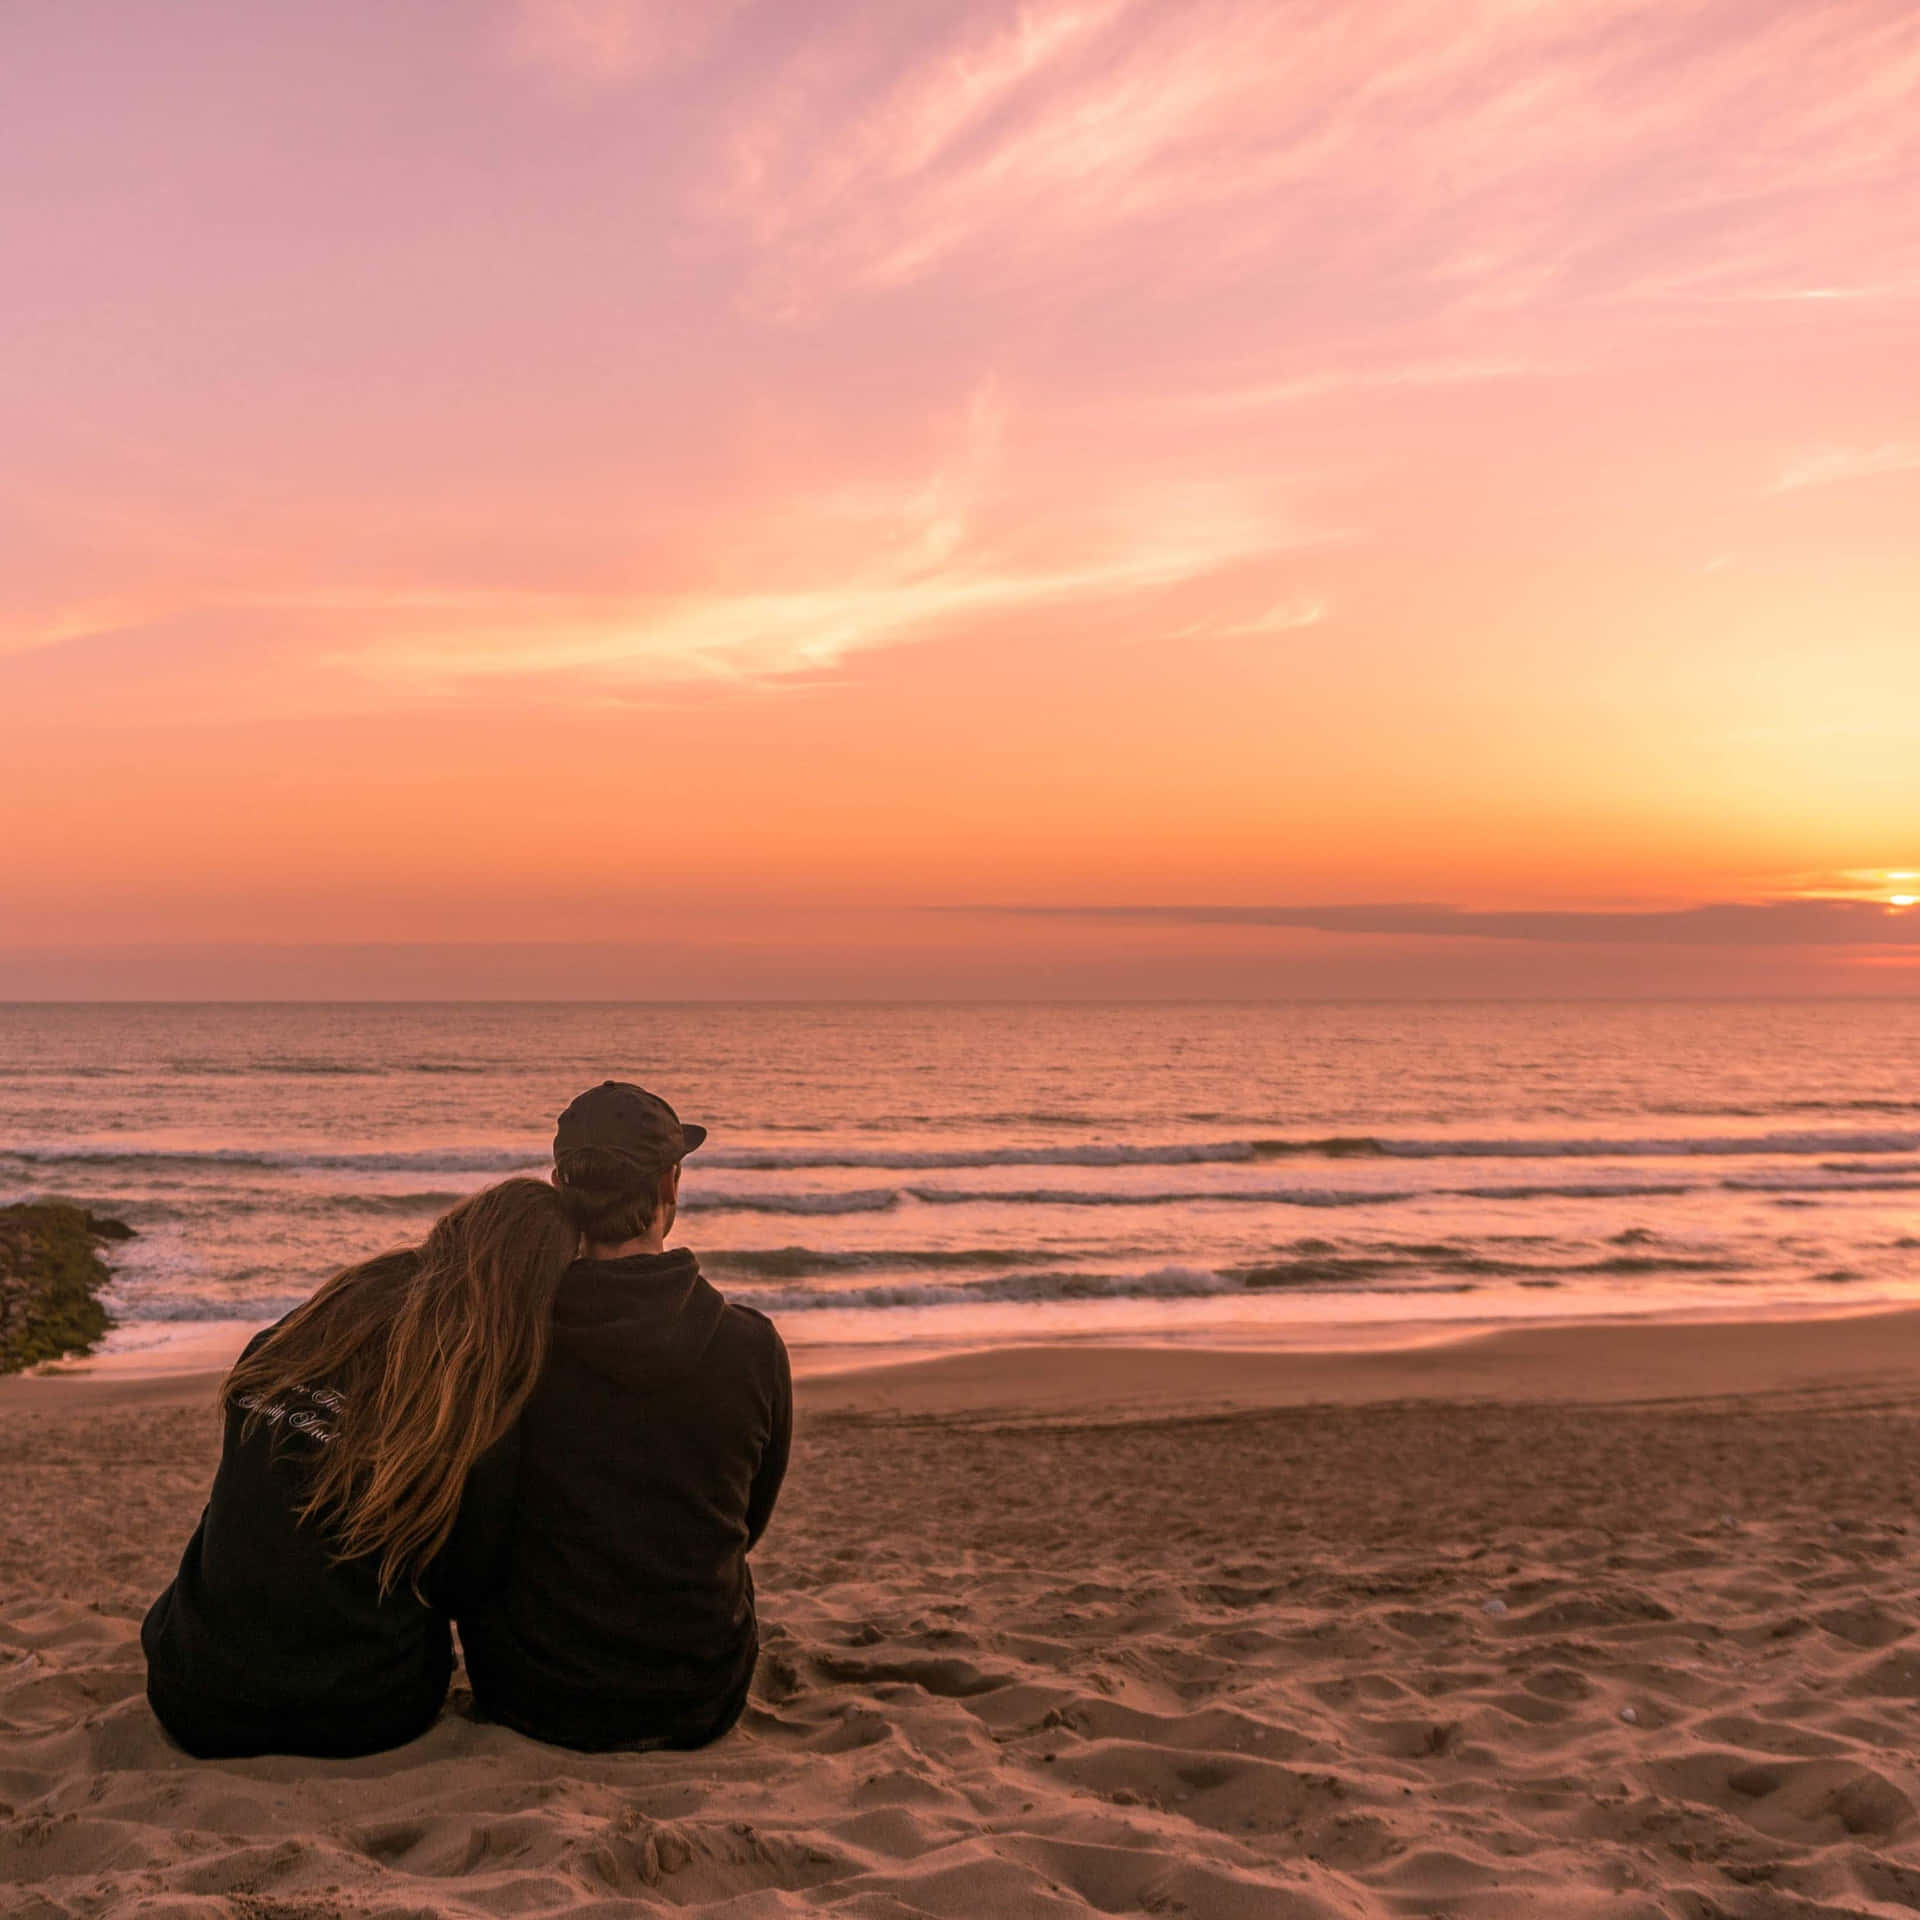 Download Couple At Beach Sitting On Sand During Sunset Picture